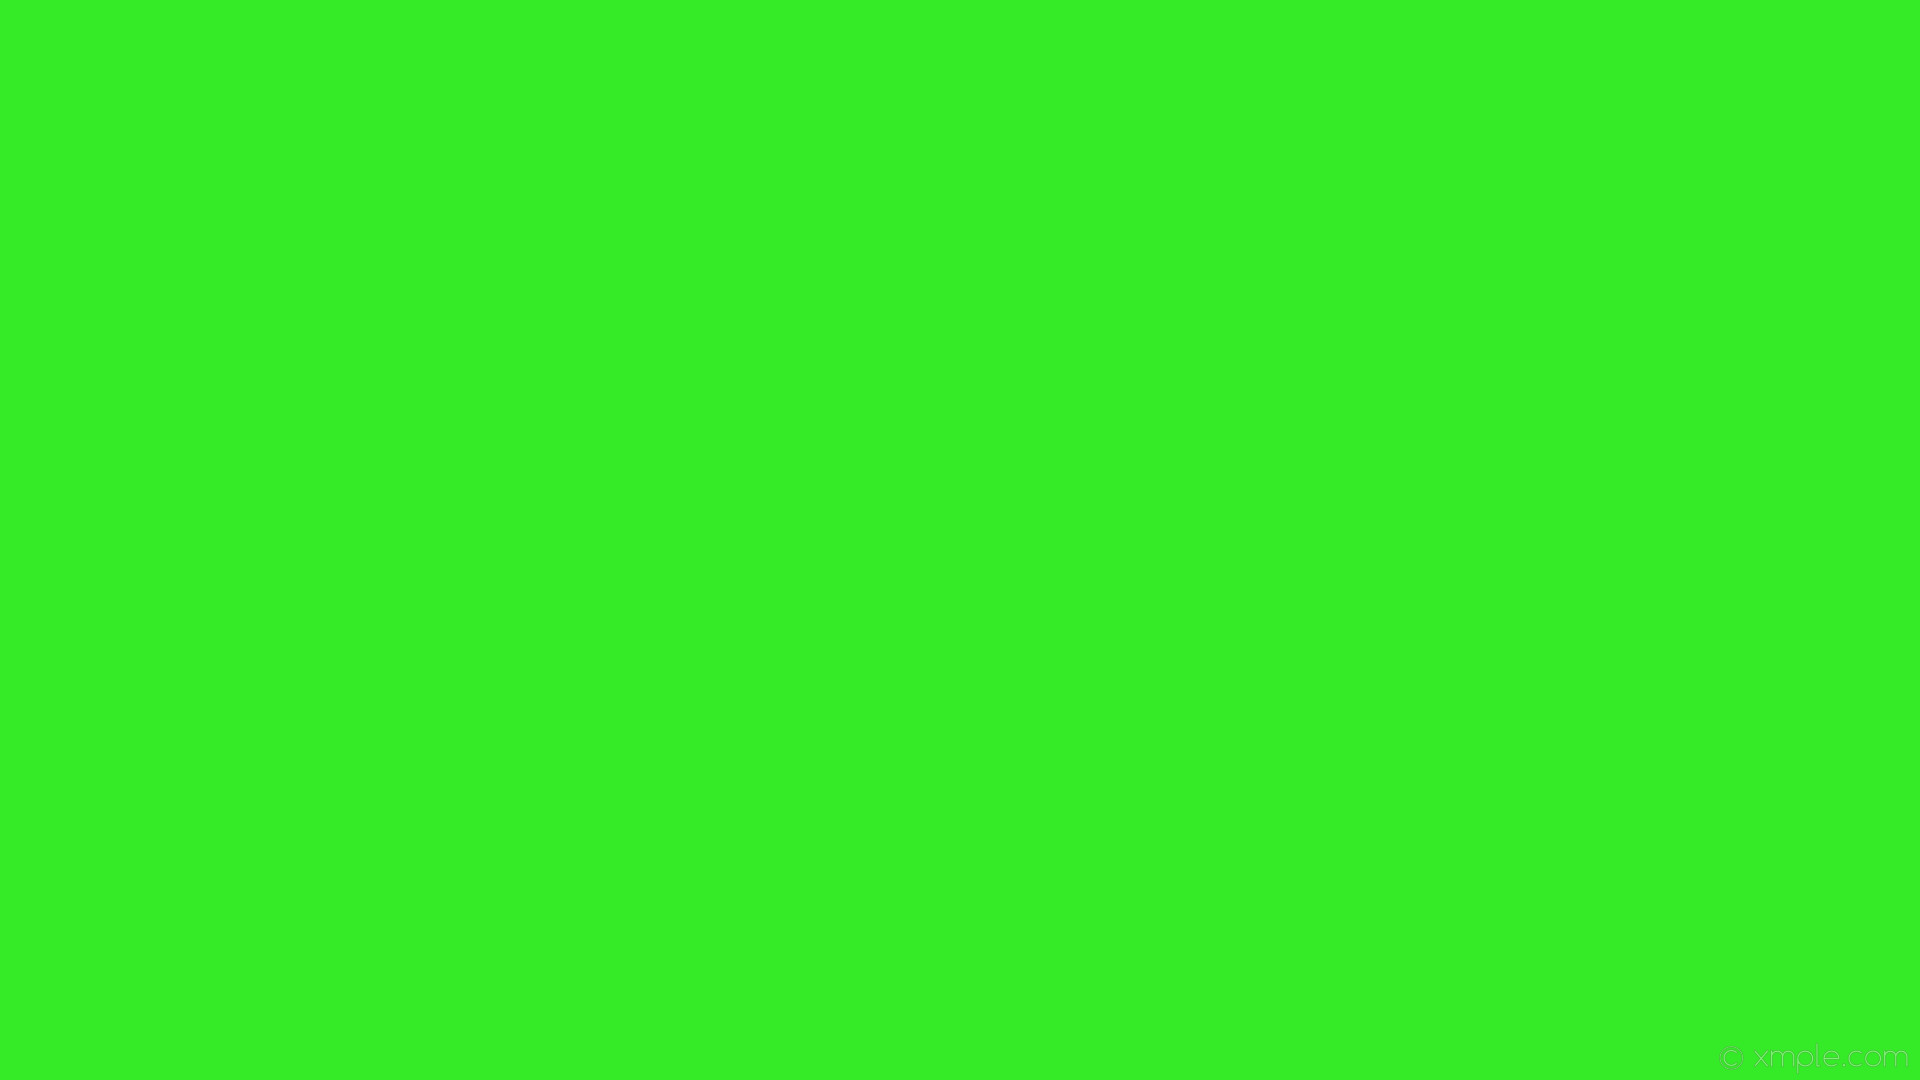 1920x1080 2560x1600 Free Solid Color Backgrounds | Green Color, Lightness and  Darkness Differs, Single Color Wallpaper